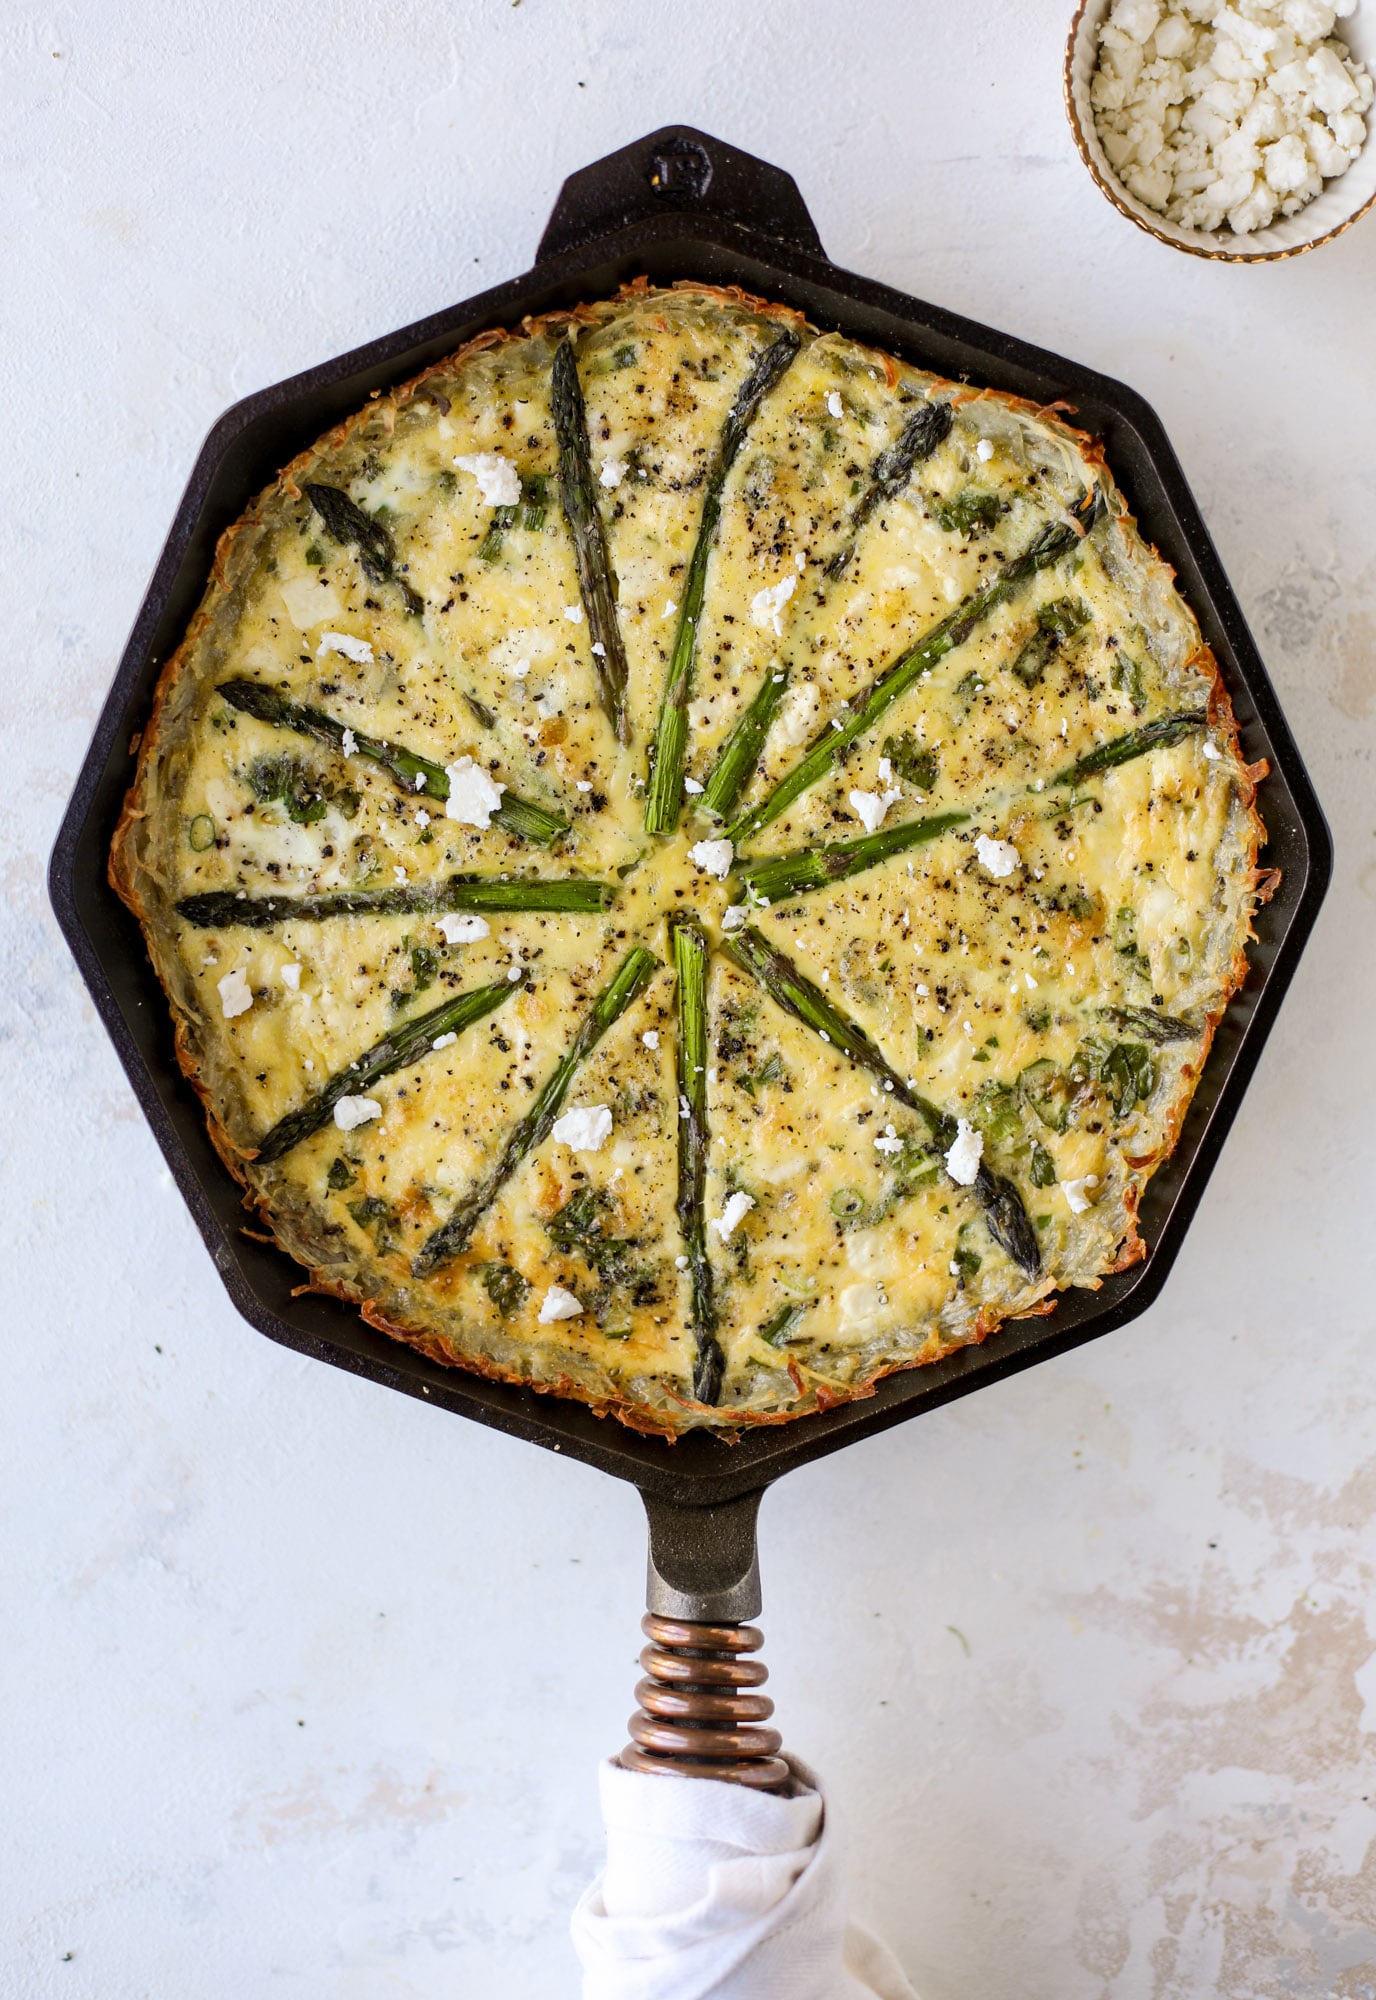 Sharing 18 of my favorite spring recipes, from asparagus to coconut cake to lavender sangria and more! 